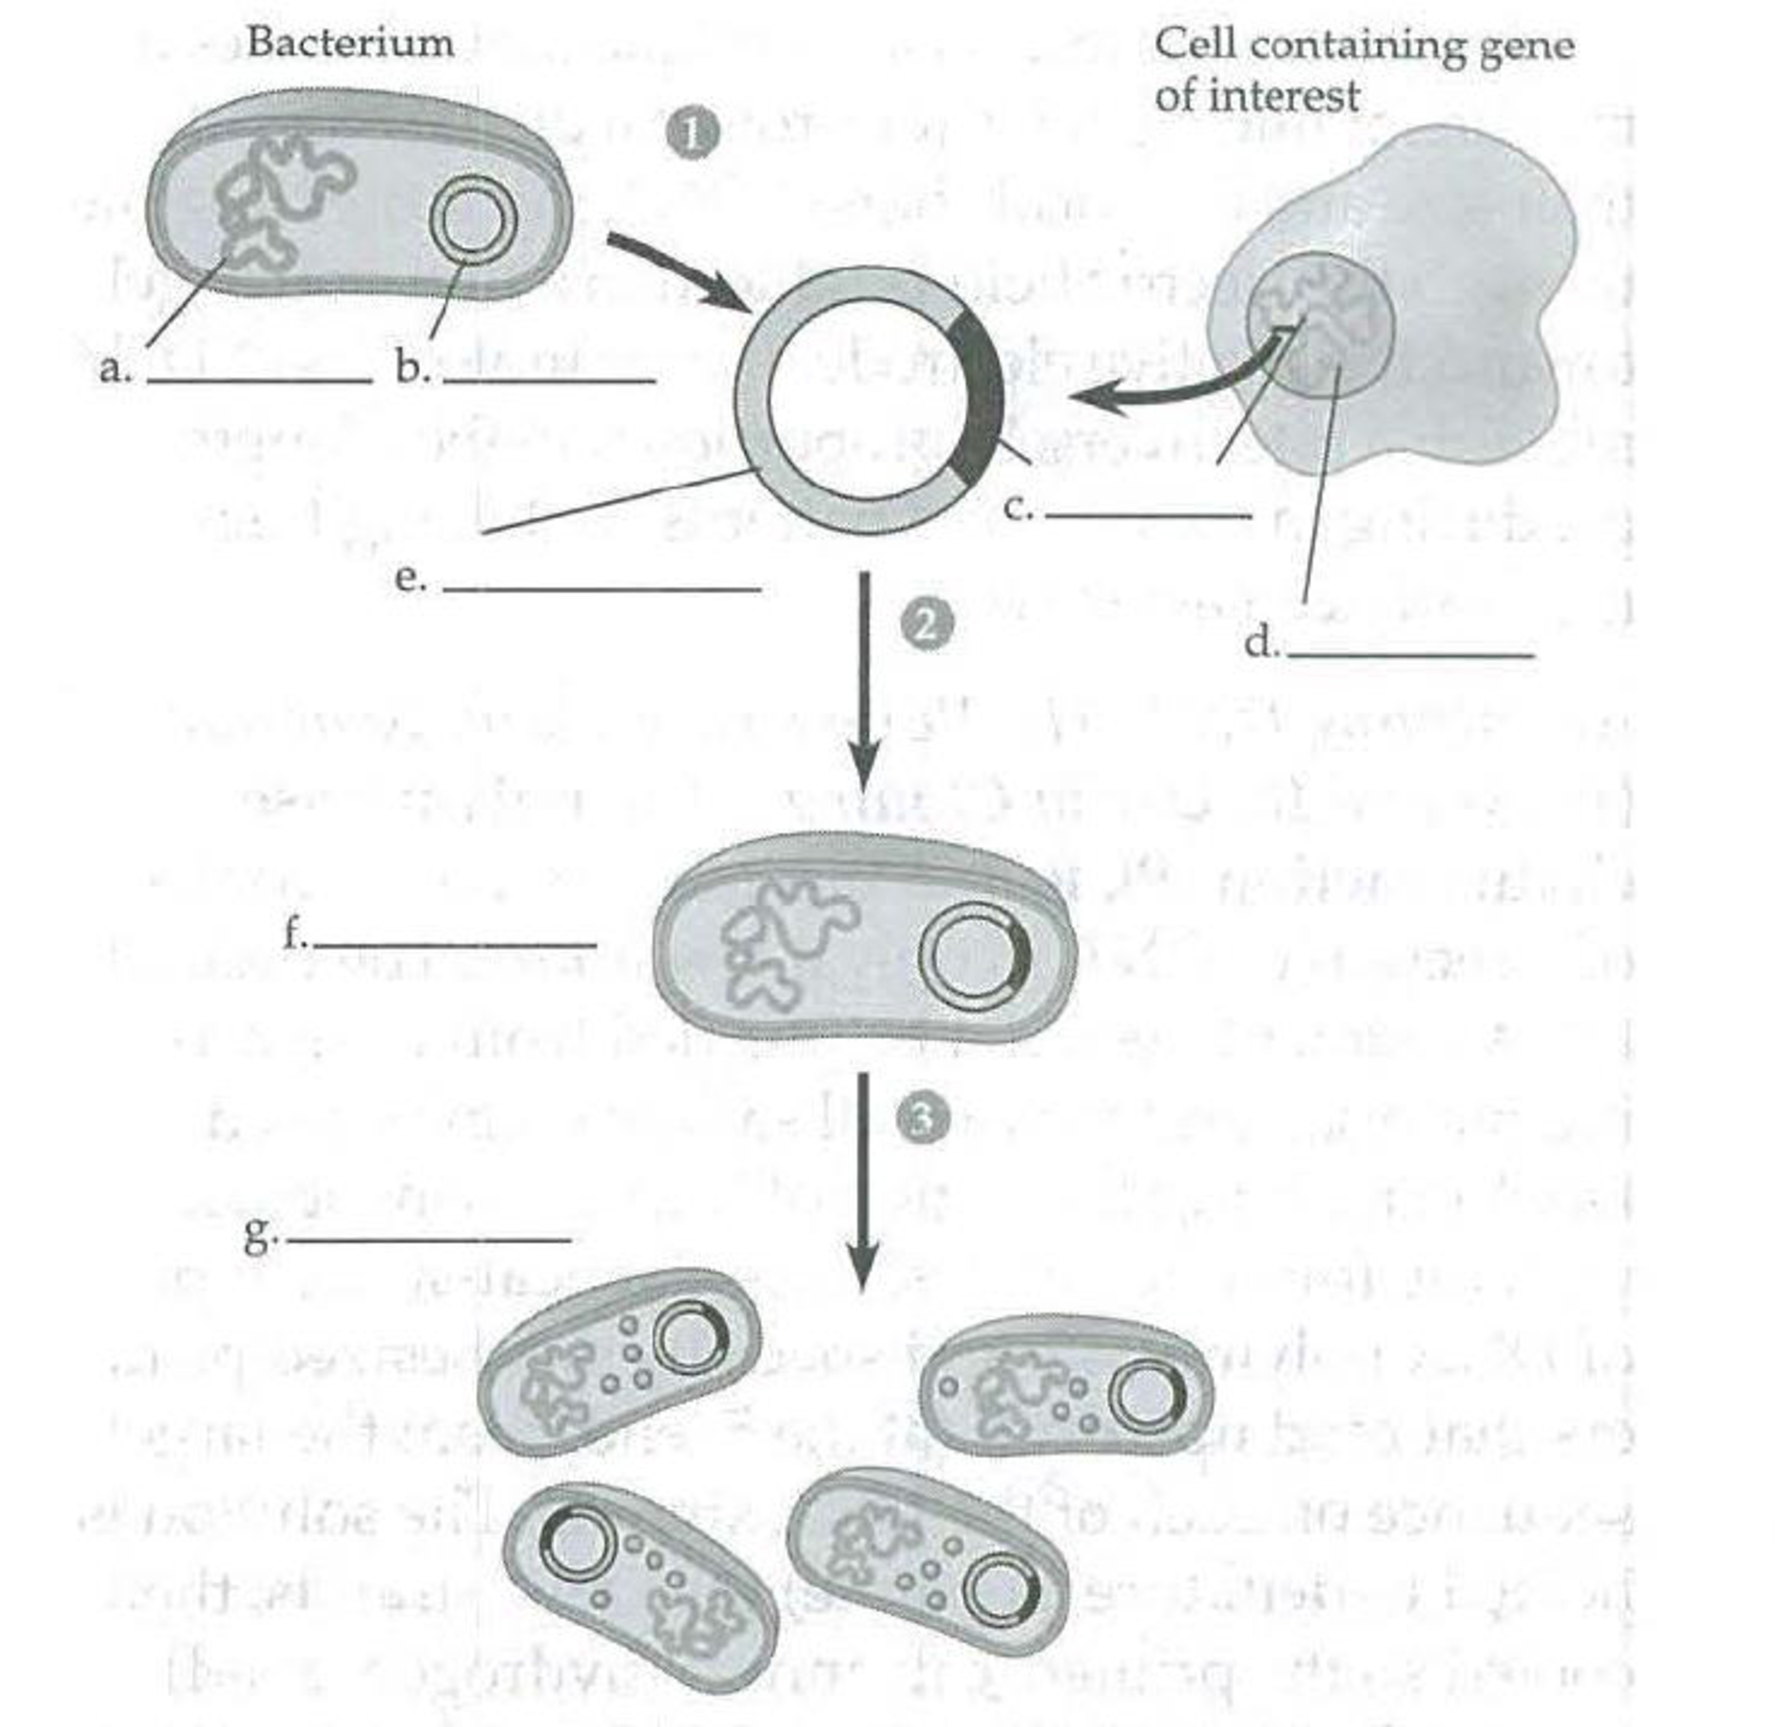 Chapter 20, Problem 2IQ, The following schematic diagram depicts an overview of gene cloning. Identify components a-g. 